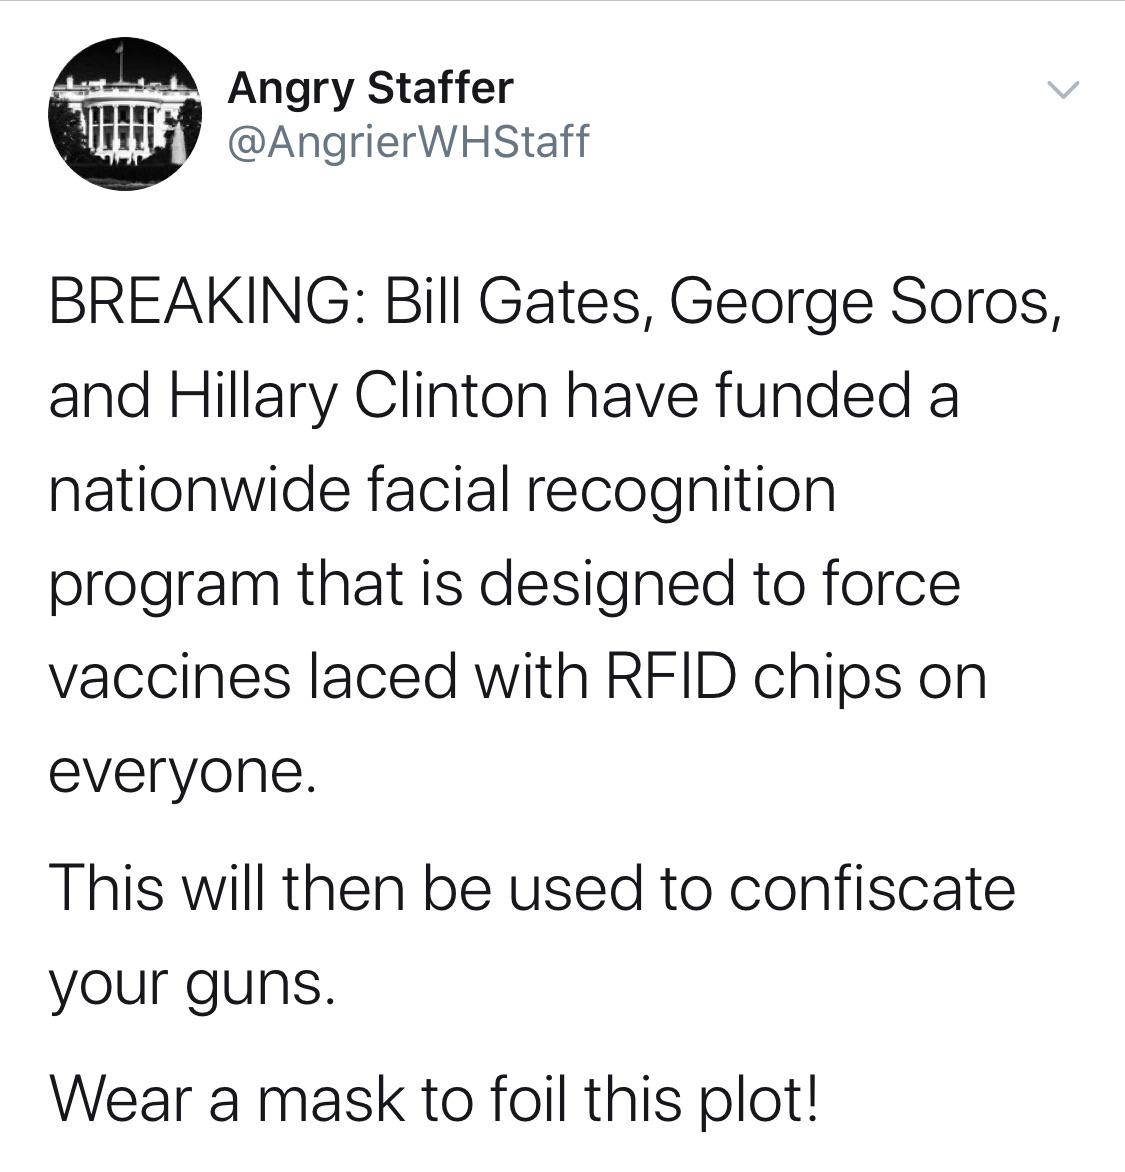 Political, RFID, OPP1, How-We-Work/Quick-Links/Grants-Database/Grants, Facebook, Drones Political Memes Political, RFID, OPP1, How-We-Work/Quick-Links/Grants-Database/Grants, Facebook, Drones text: Angry Staffer @AngrierWHStaff BREAKING: Bill Gates, George Soros, and Hillary Clinton have funded a nationwide facial recognition program that is designed to force vaccines laced with RFID chips on everyone. This will then be used to confiscate your guns. Wear a mask to foil this plot! 